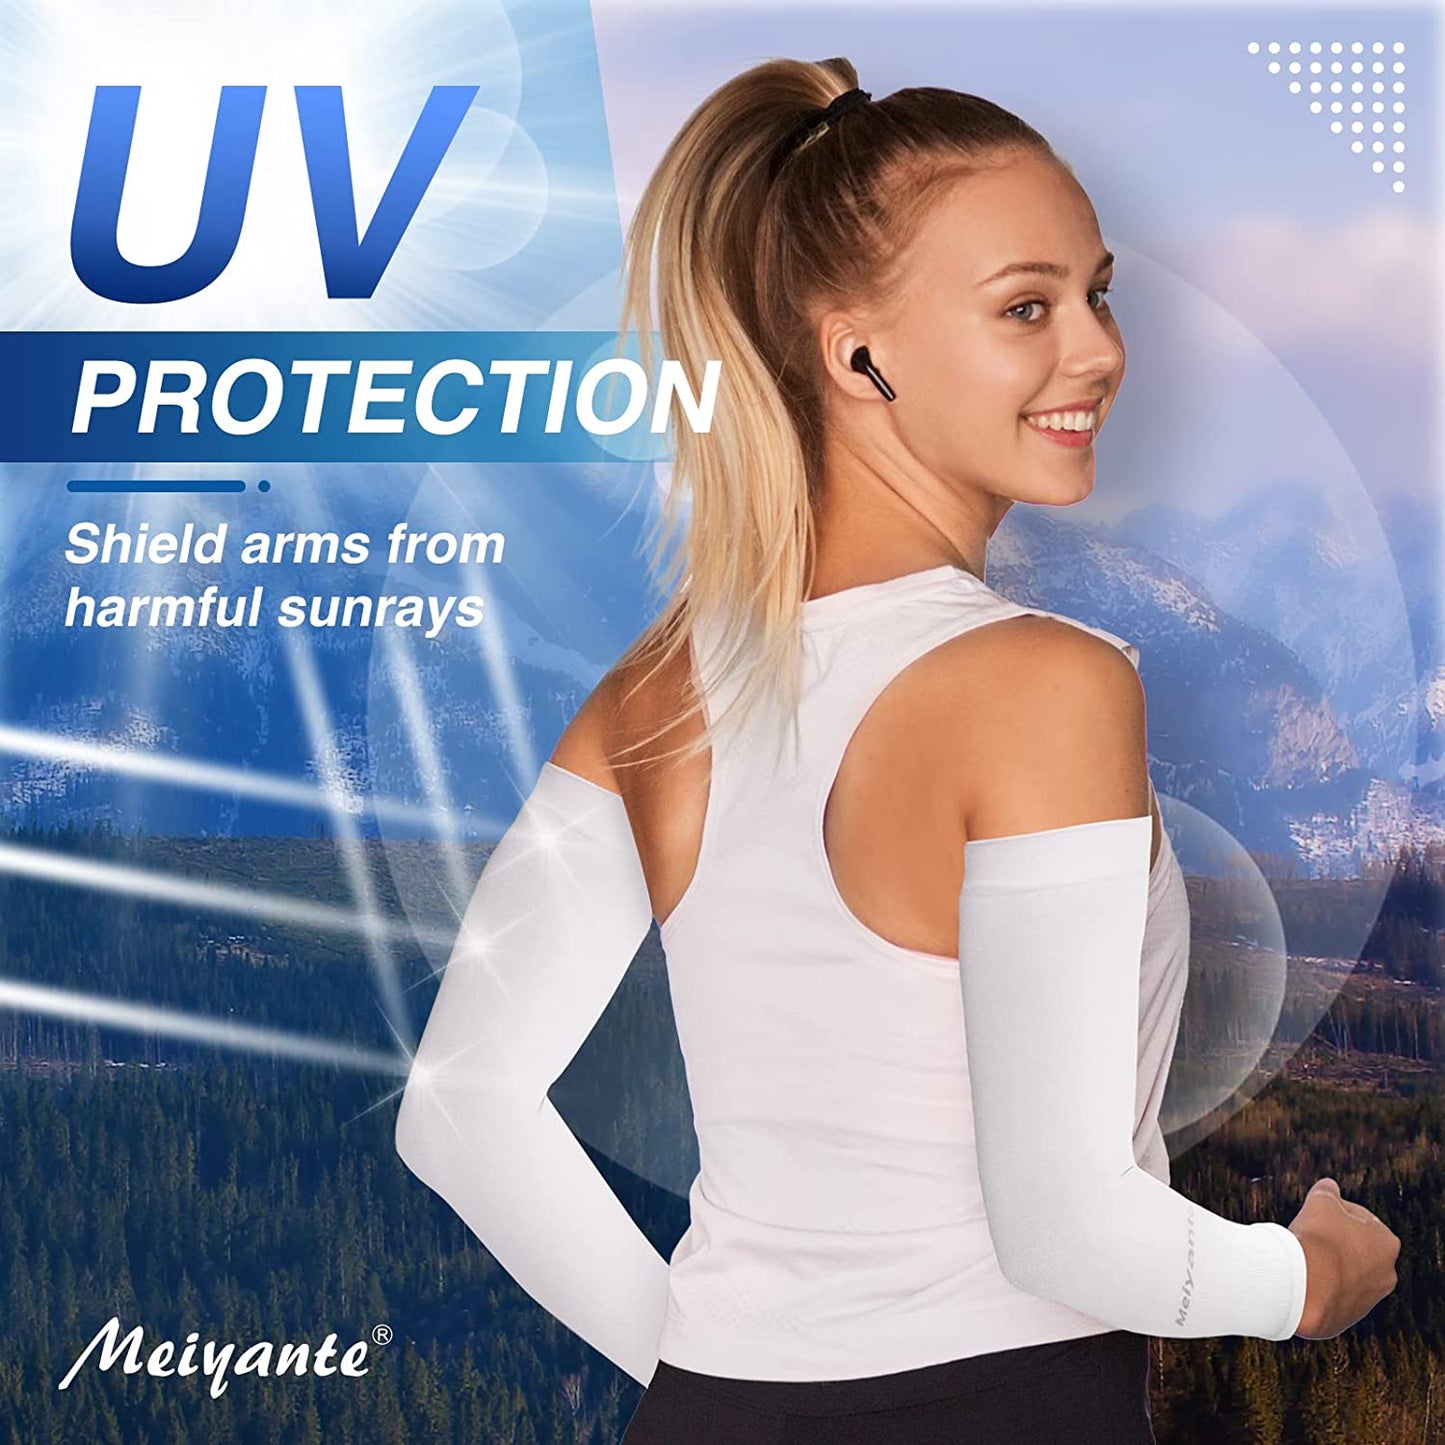 Meiyante Arm Sleeves for Men Women Work 1 Pair UV Sun Protection UPF Long Sleeves Tattoo Cover Up Sleeves to Cover Arm Sleeves Cooling (Amazon Arm Sleeves)